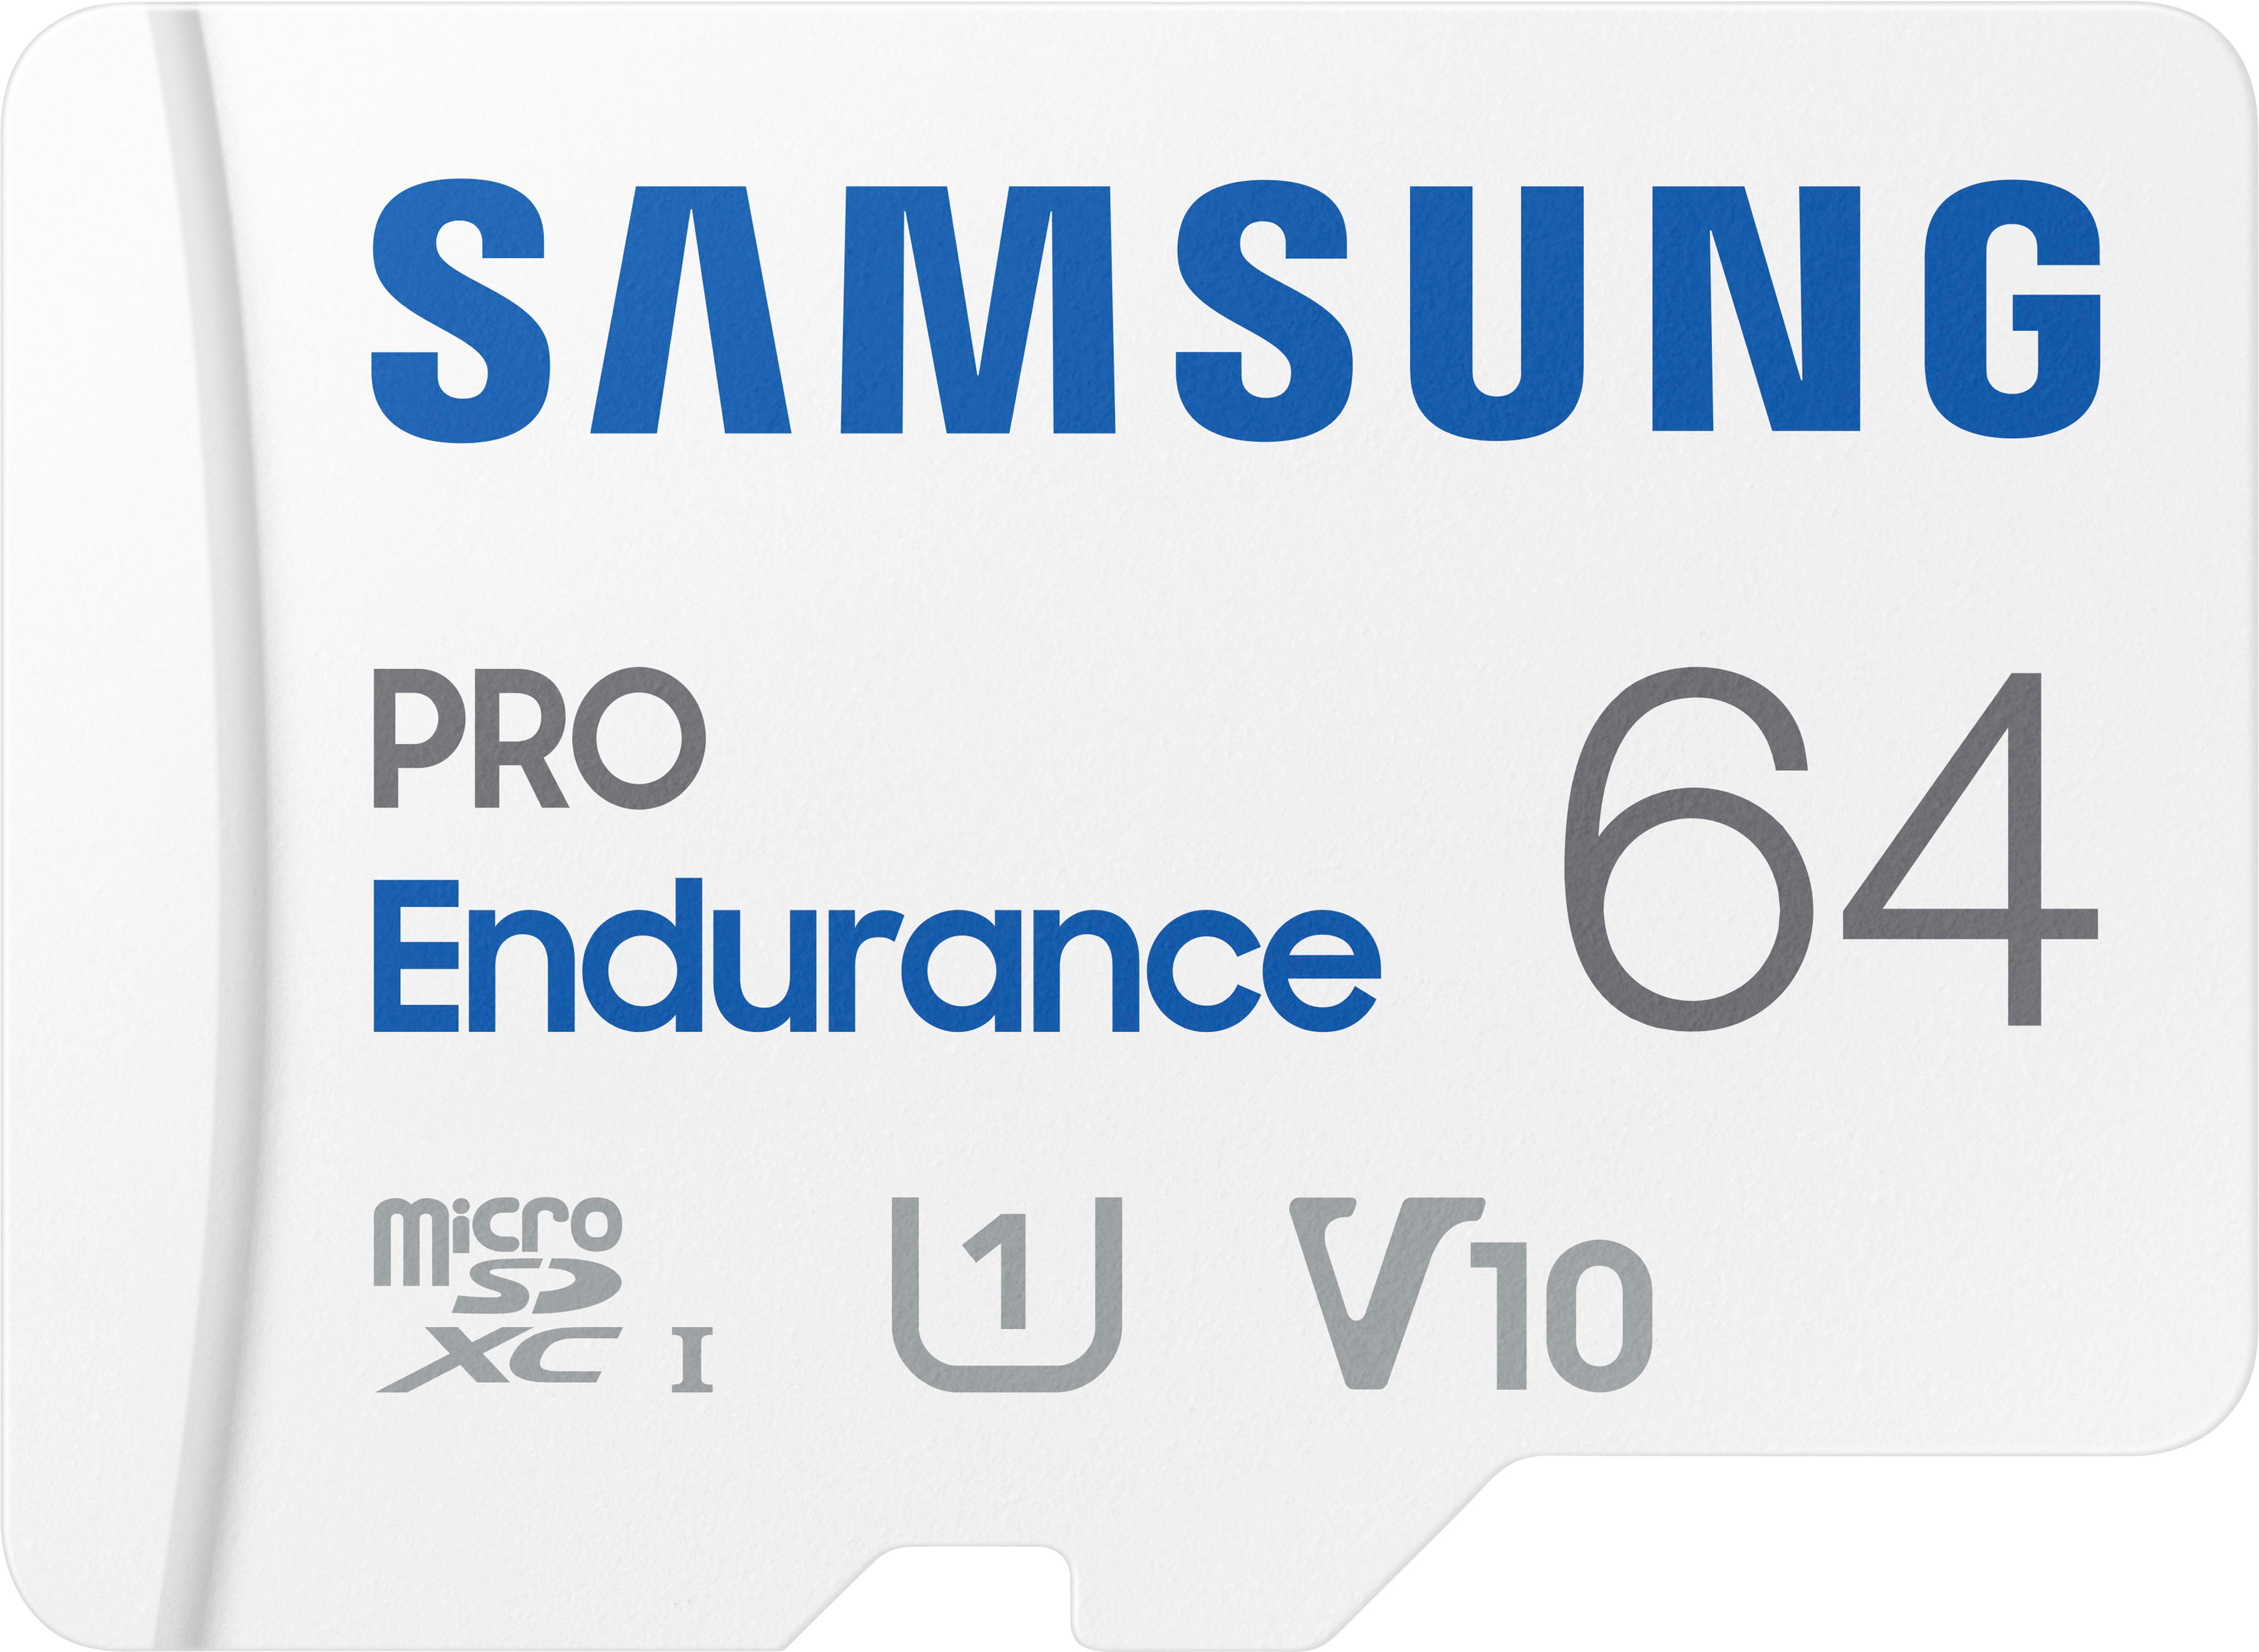 Samsung 64GB EVO microSD Card Review: A Great Card Beaten By Its